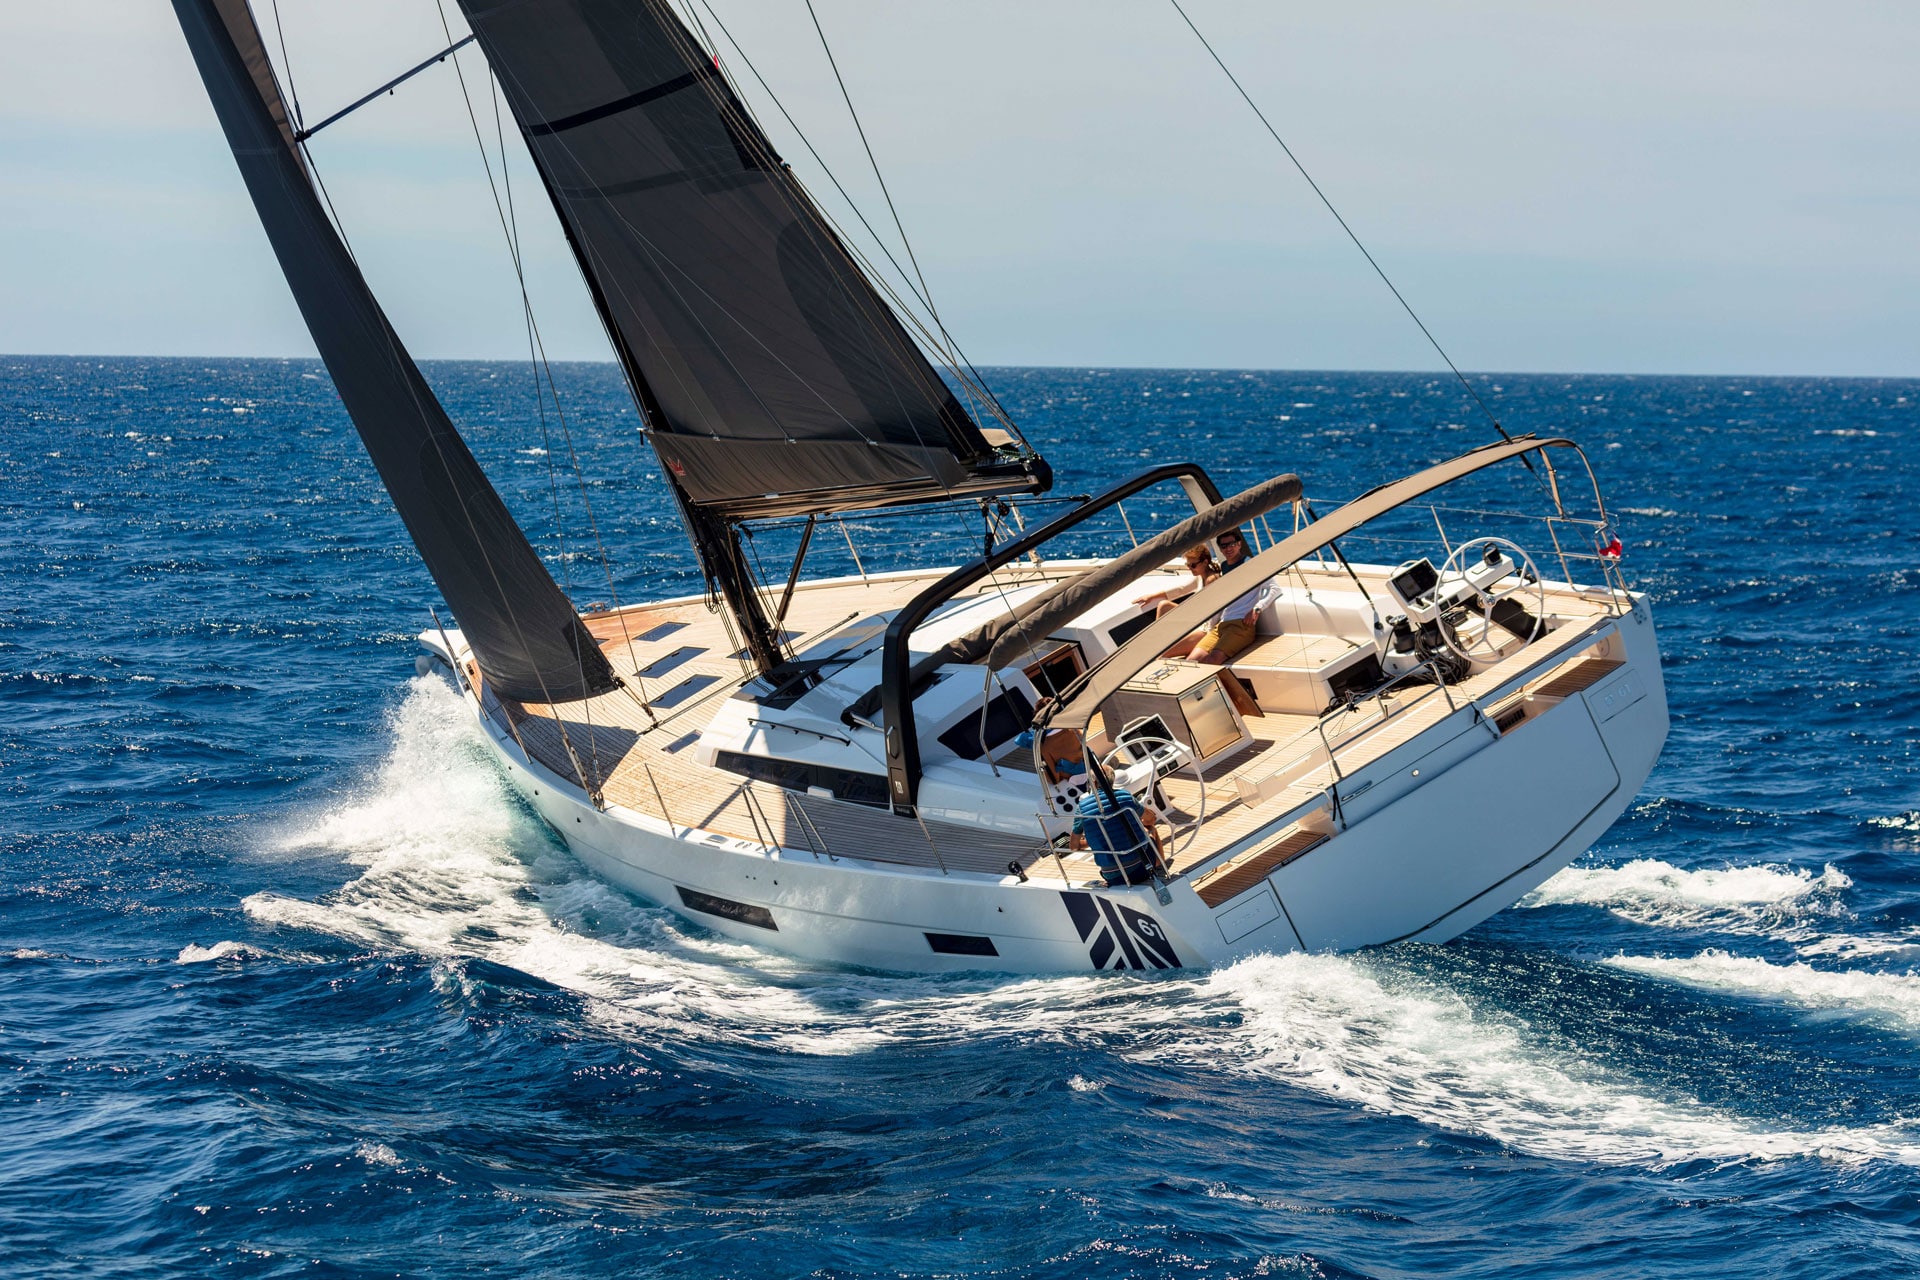 dufour yachts contact